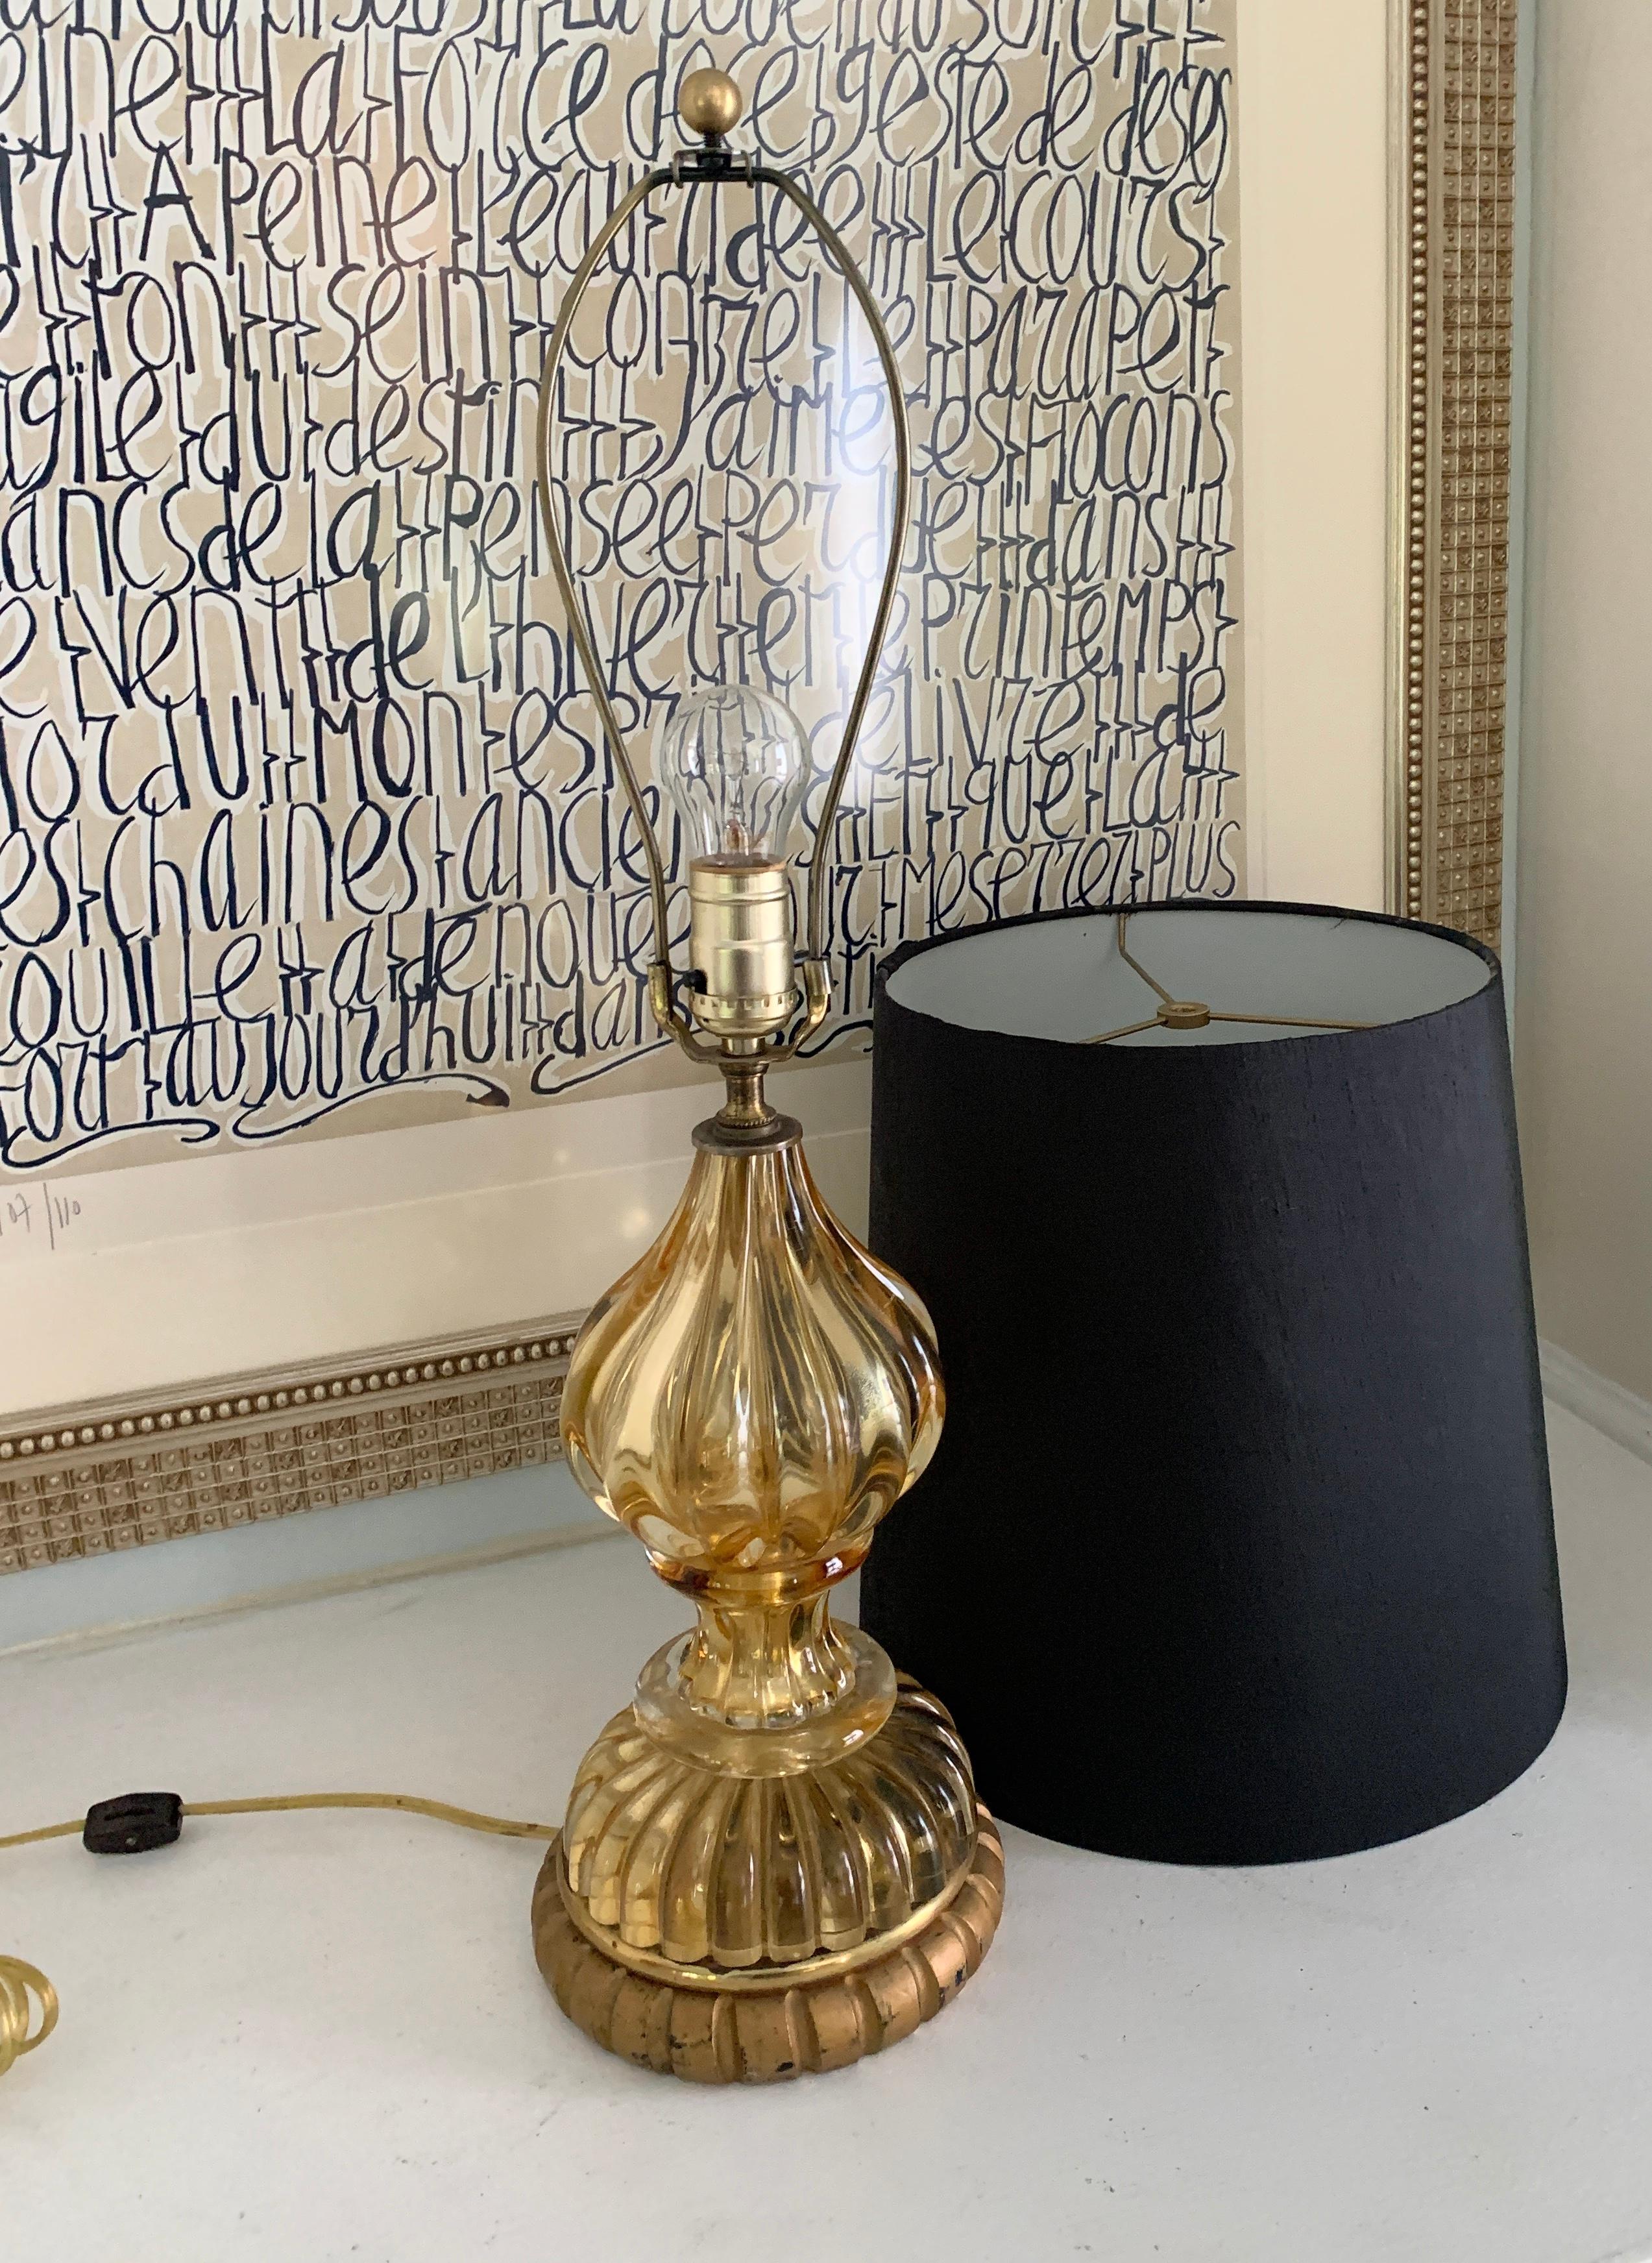 A gold Murano glass lamp with giltwood base and silk shade. Suited for the vanity, side table, bedside or guest room. A wonderful statement of Murano. The gold color works in any setting.

Silk shade included, measures: 10